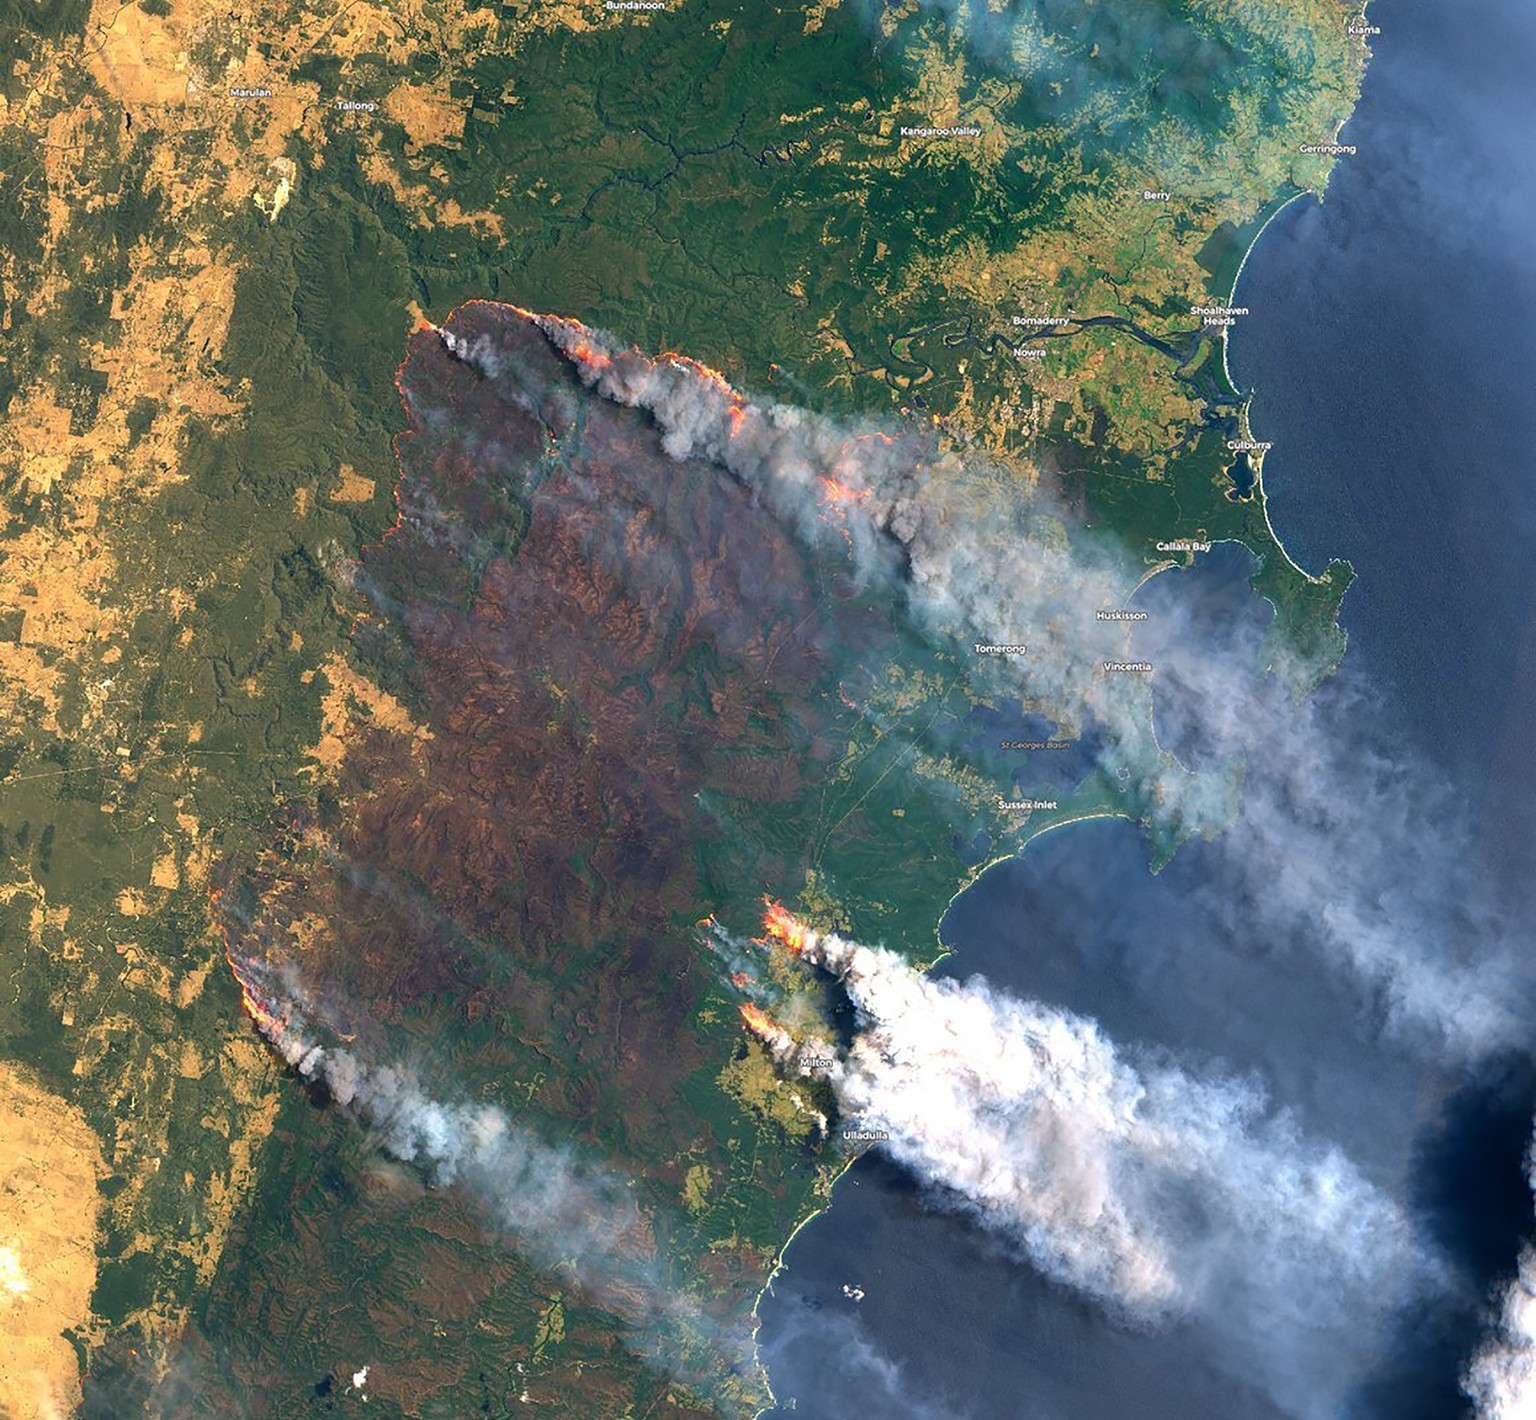 In this satellite image released by Copernicus Sentinel Imagery, 2020 twitter page acquired Dec. 31, 2019, shows the Clyde Mountain Fire, 200 kms. (124 miles) south of Sydney, Australia. (Copernicus S ...